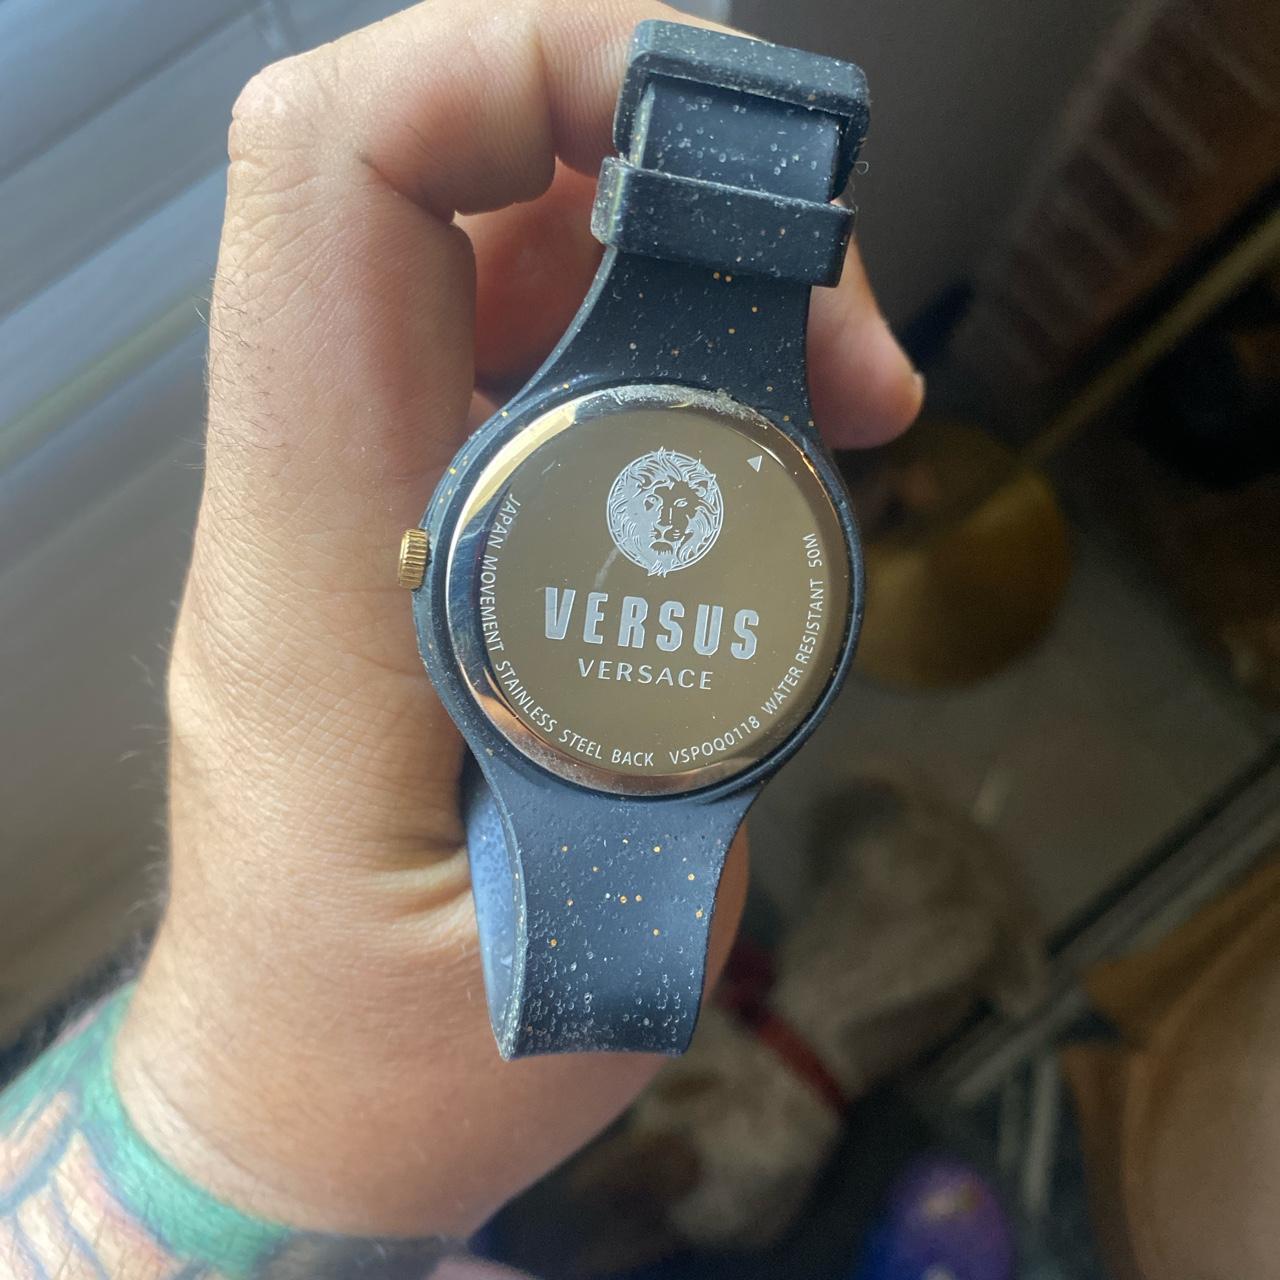 Product Image 2 - Used Versus Versace watch that